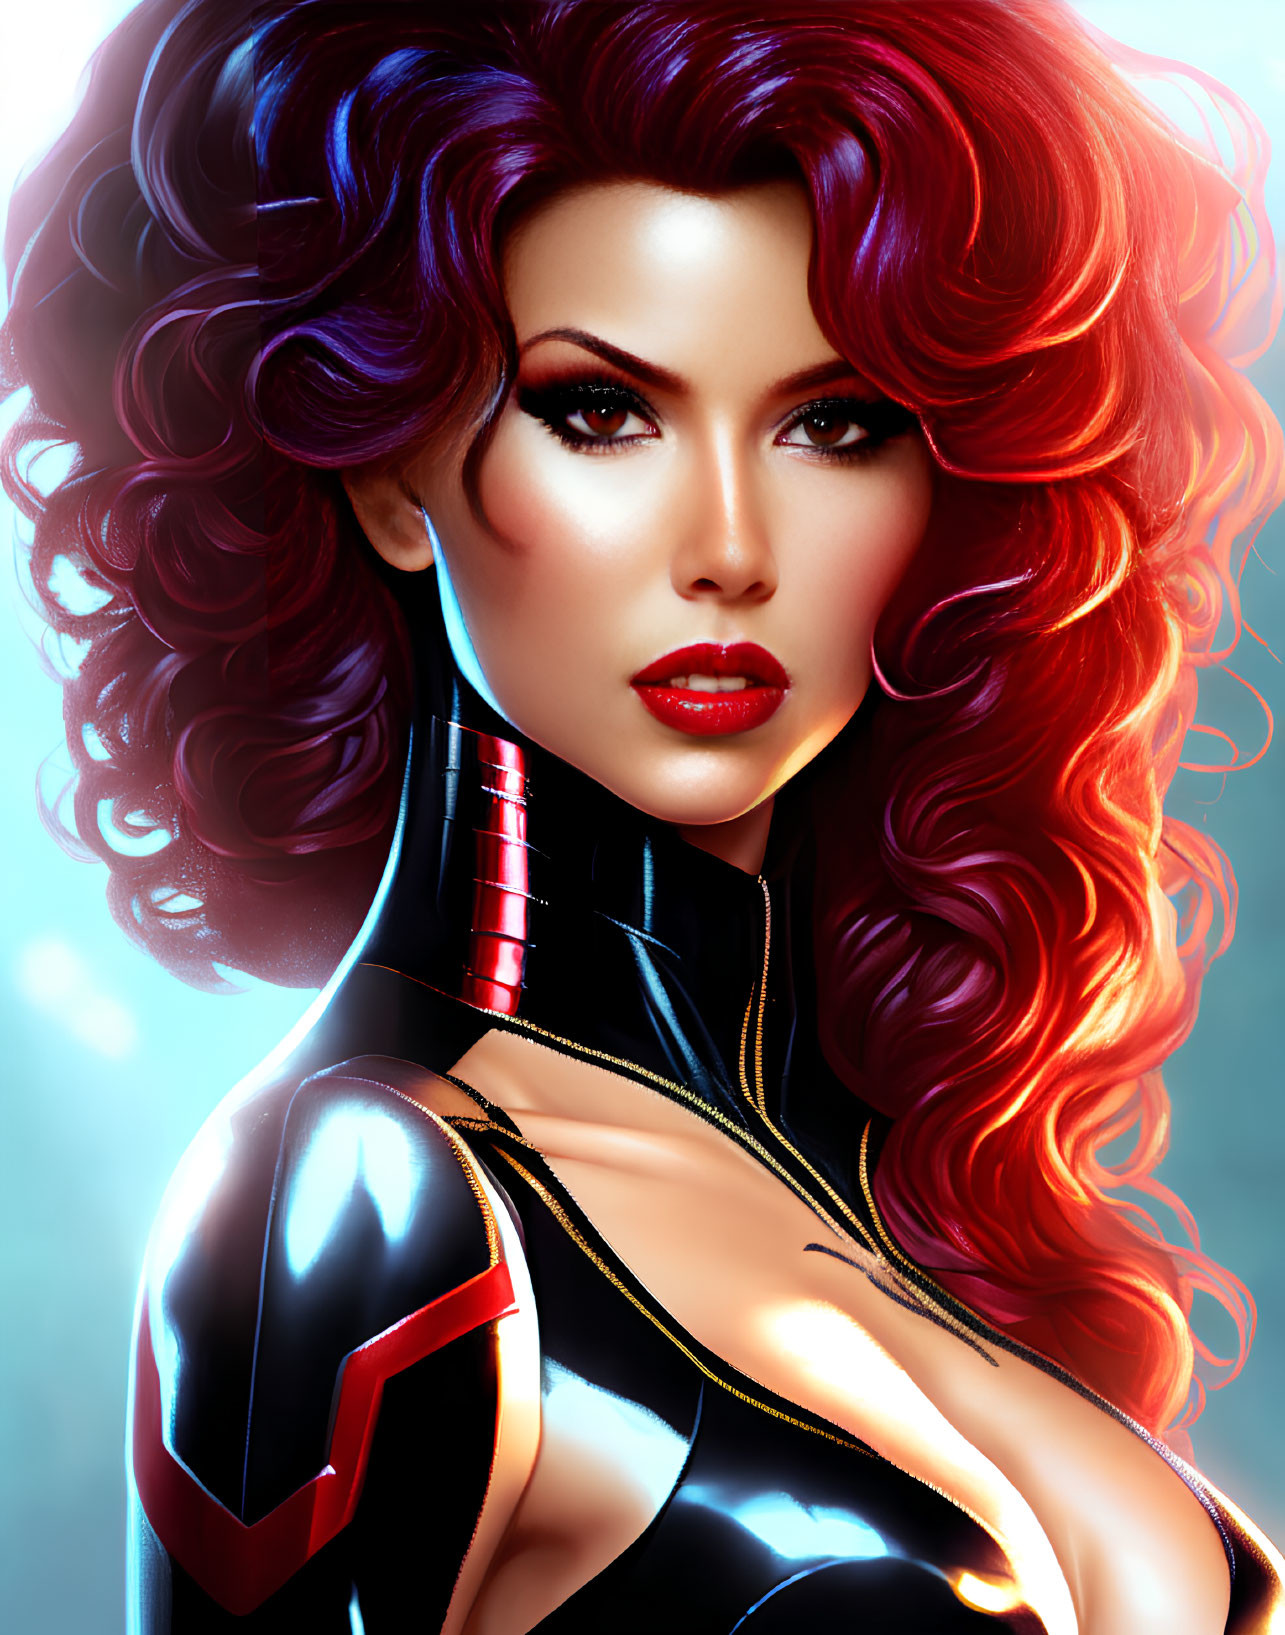 Digital illustration of woman with red and purple hair in futuristic bodysuit